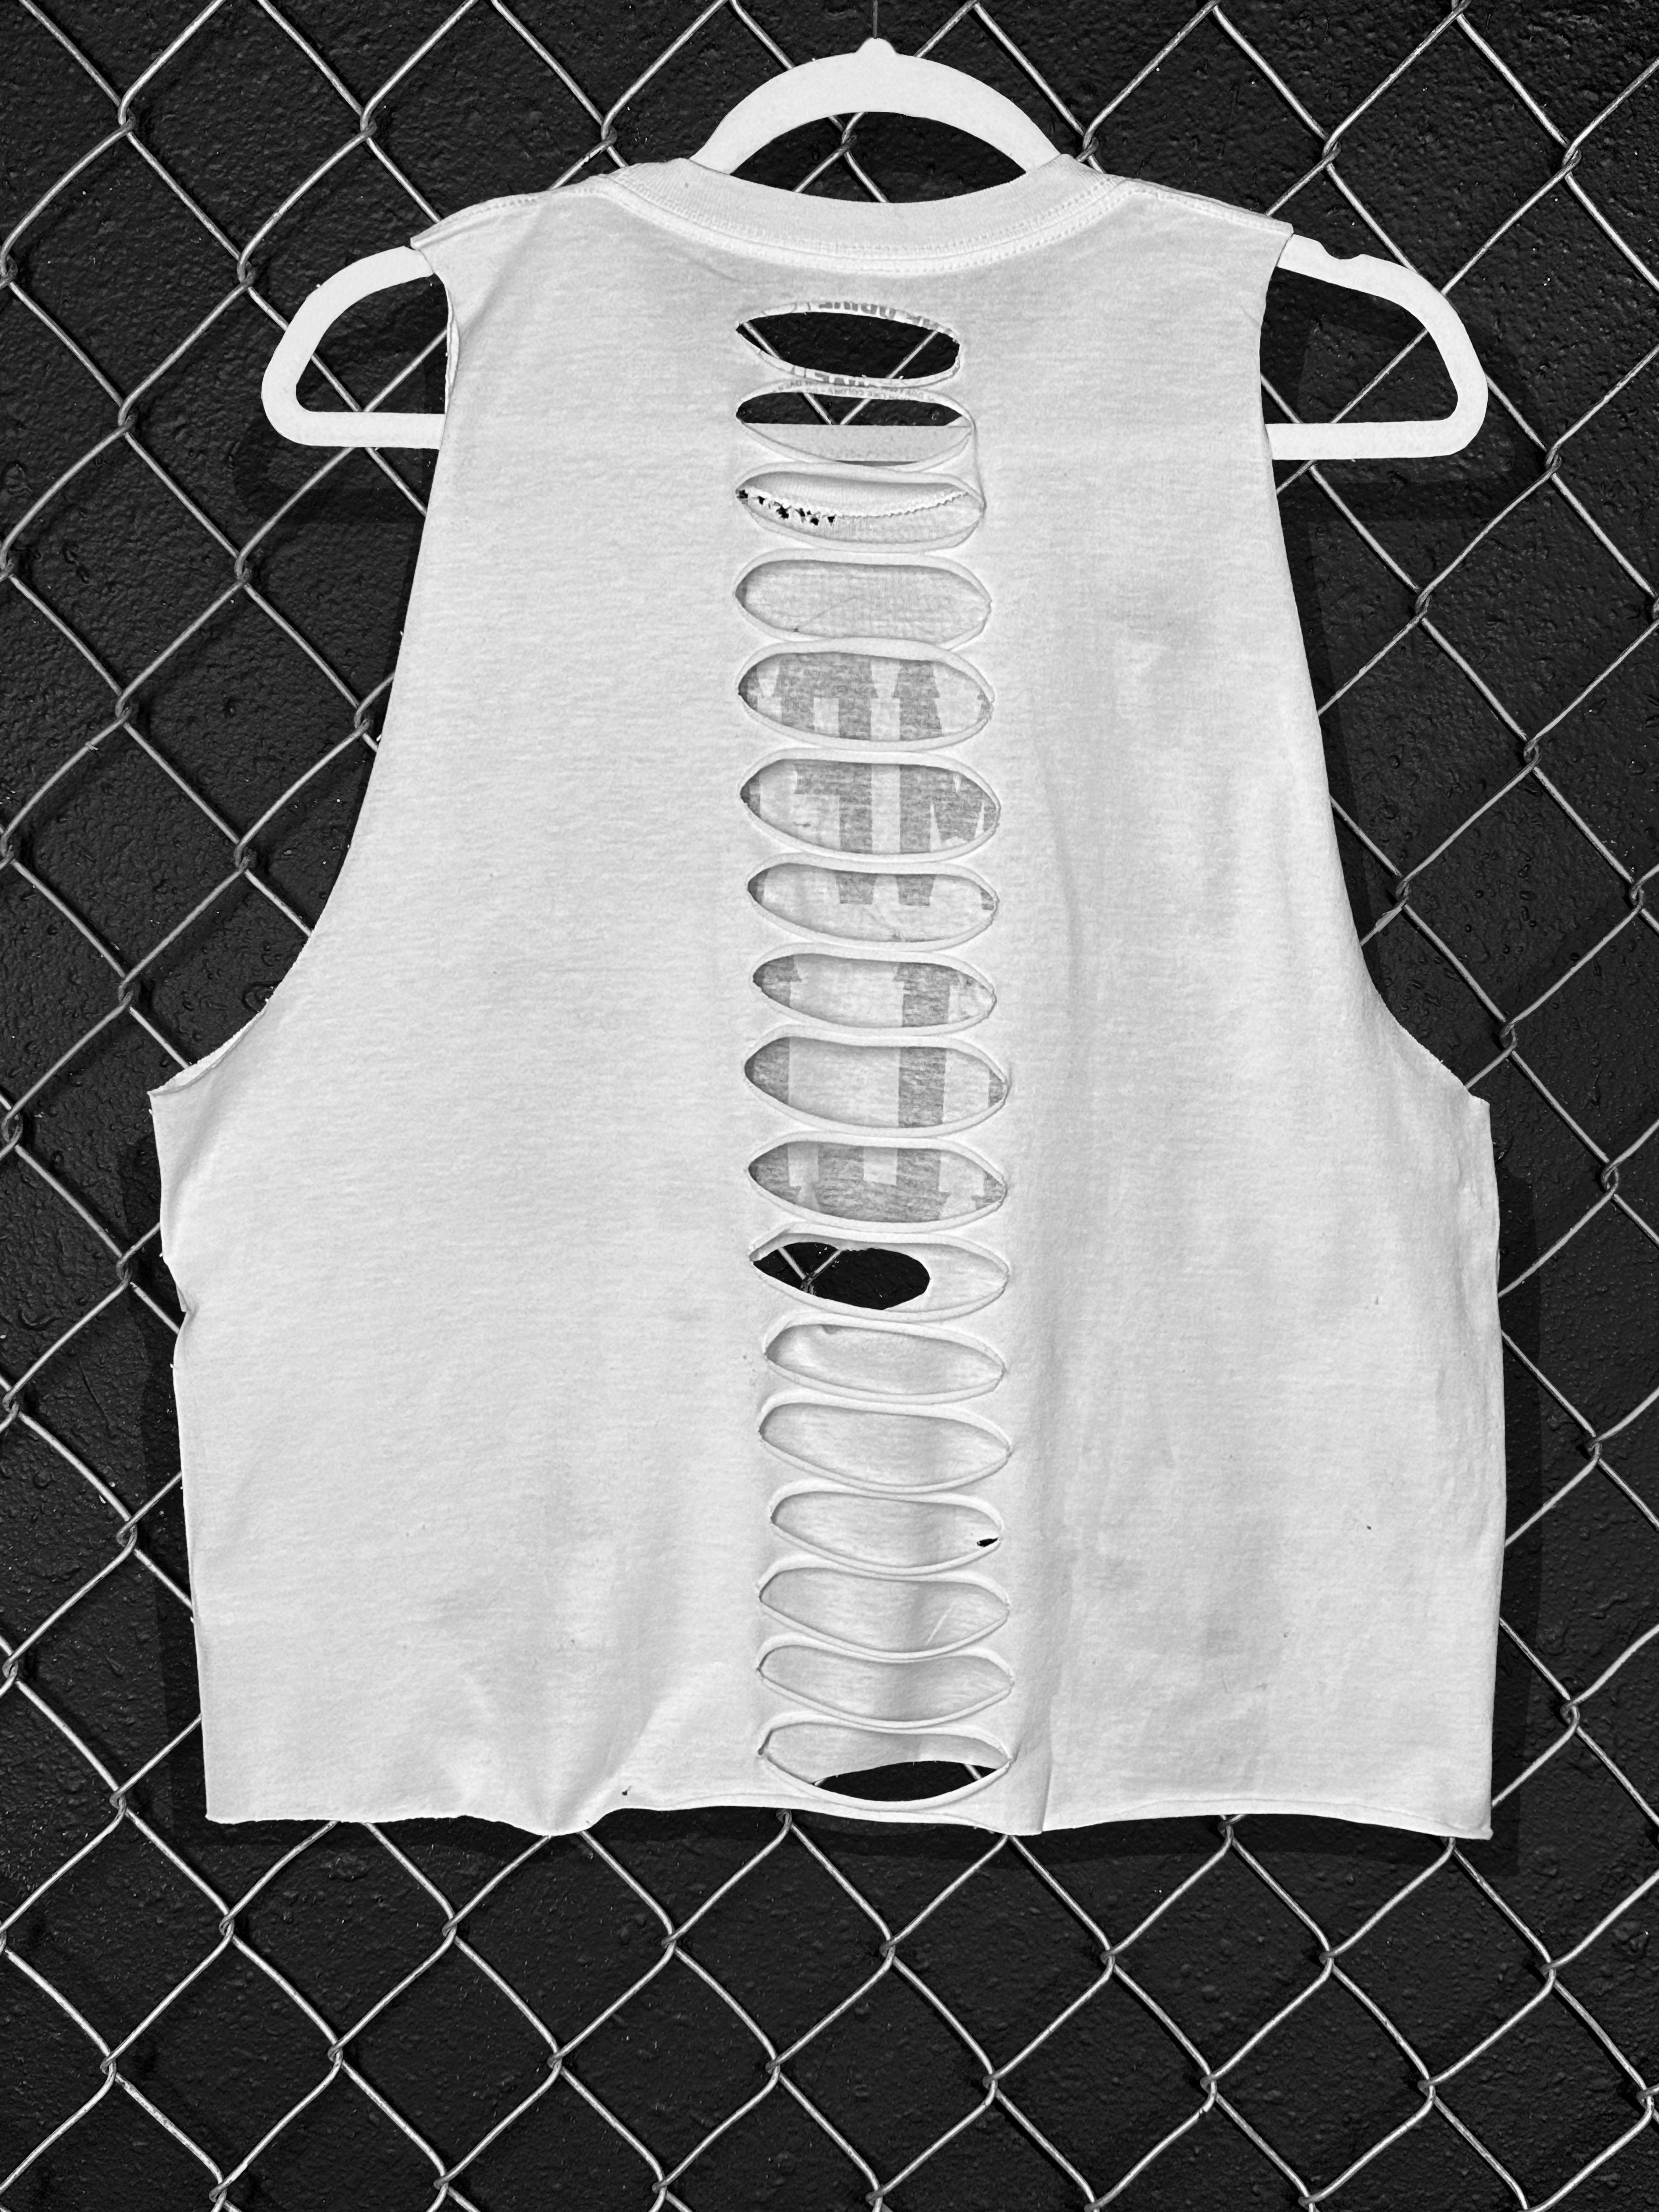 BLOOD COMFORT KILLS CROP TANK TOP WHITE - The Drive Clothing